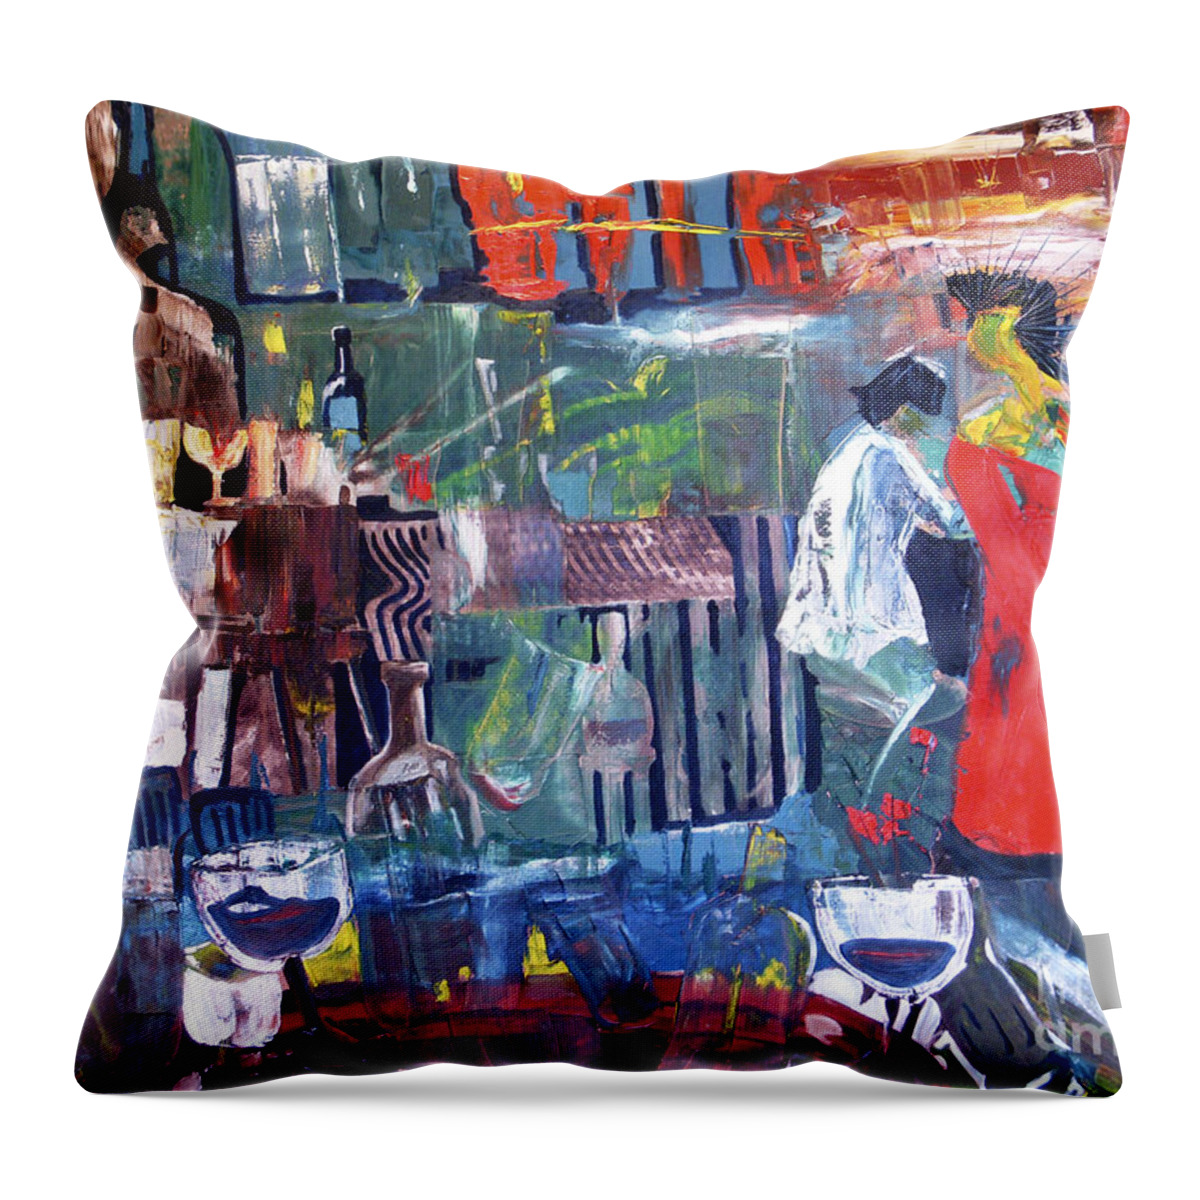 Woman In Red Throw Pillow featuring the painting Woman In Red by James Lavott